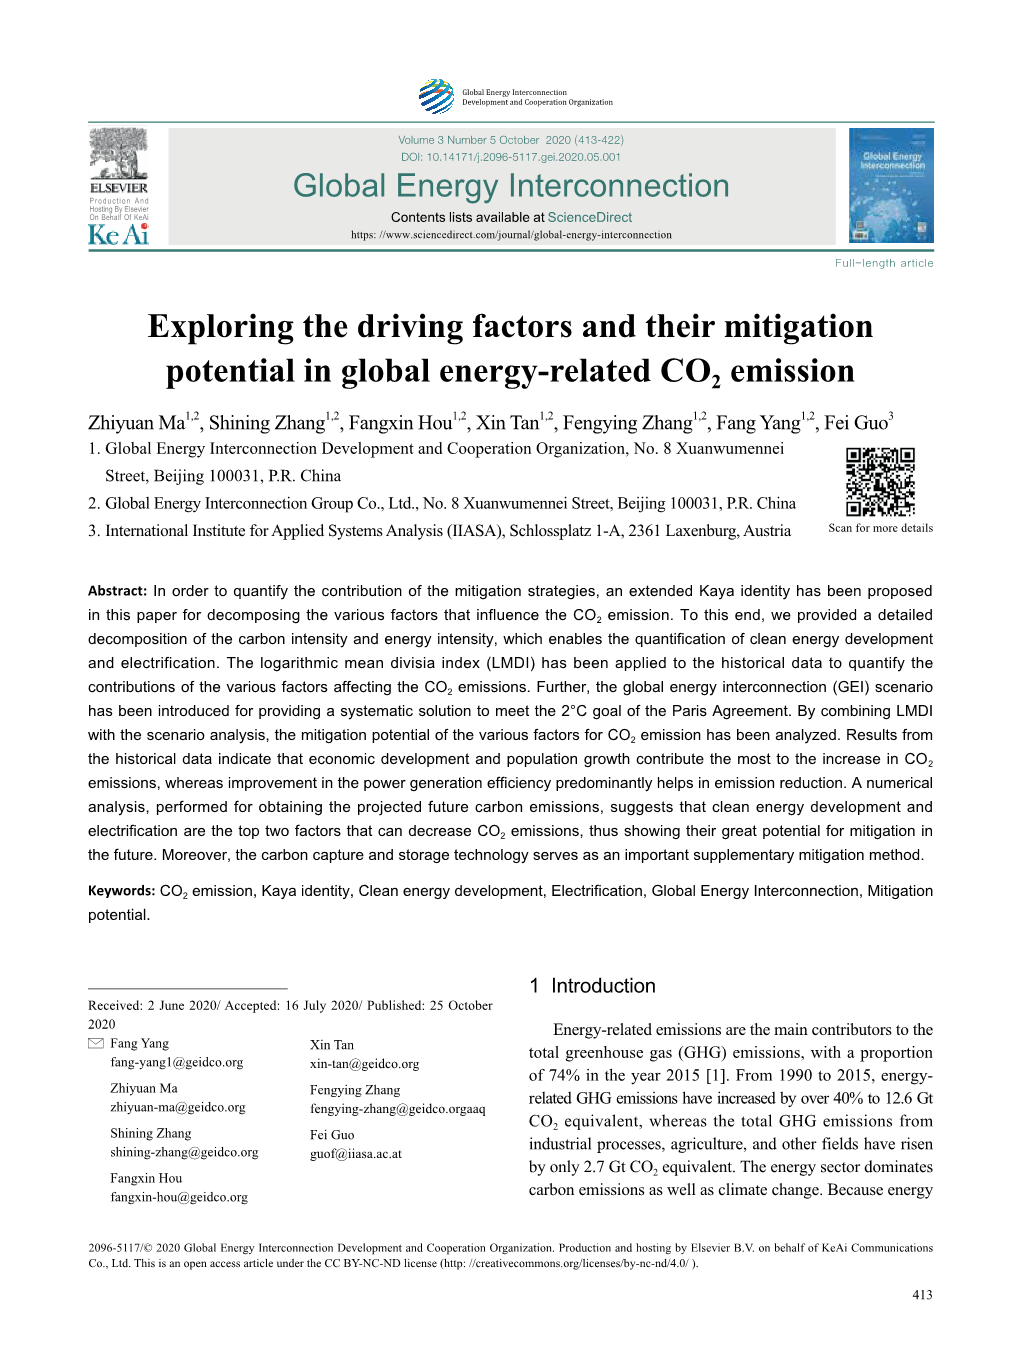 Exploring the Driving Factors and Their Mitigation Potential in Global Energy-Related CO2 Emission